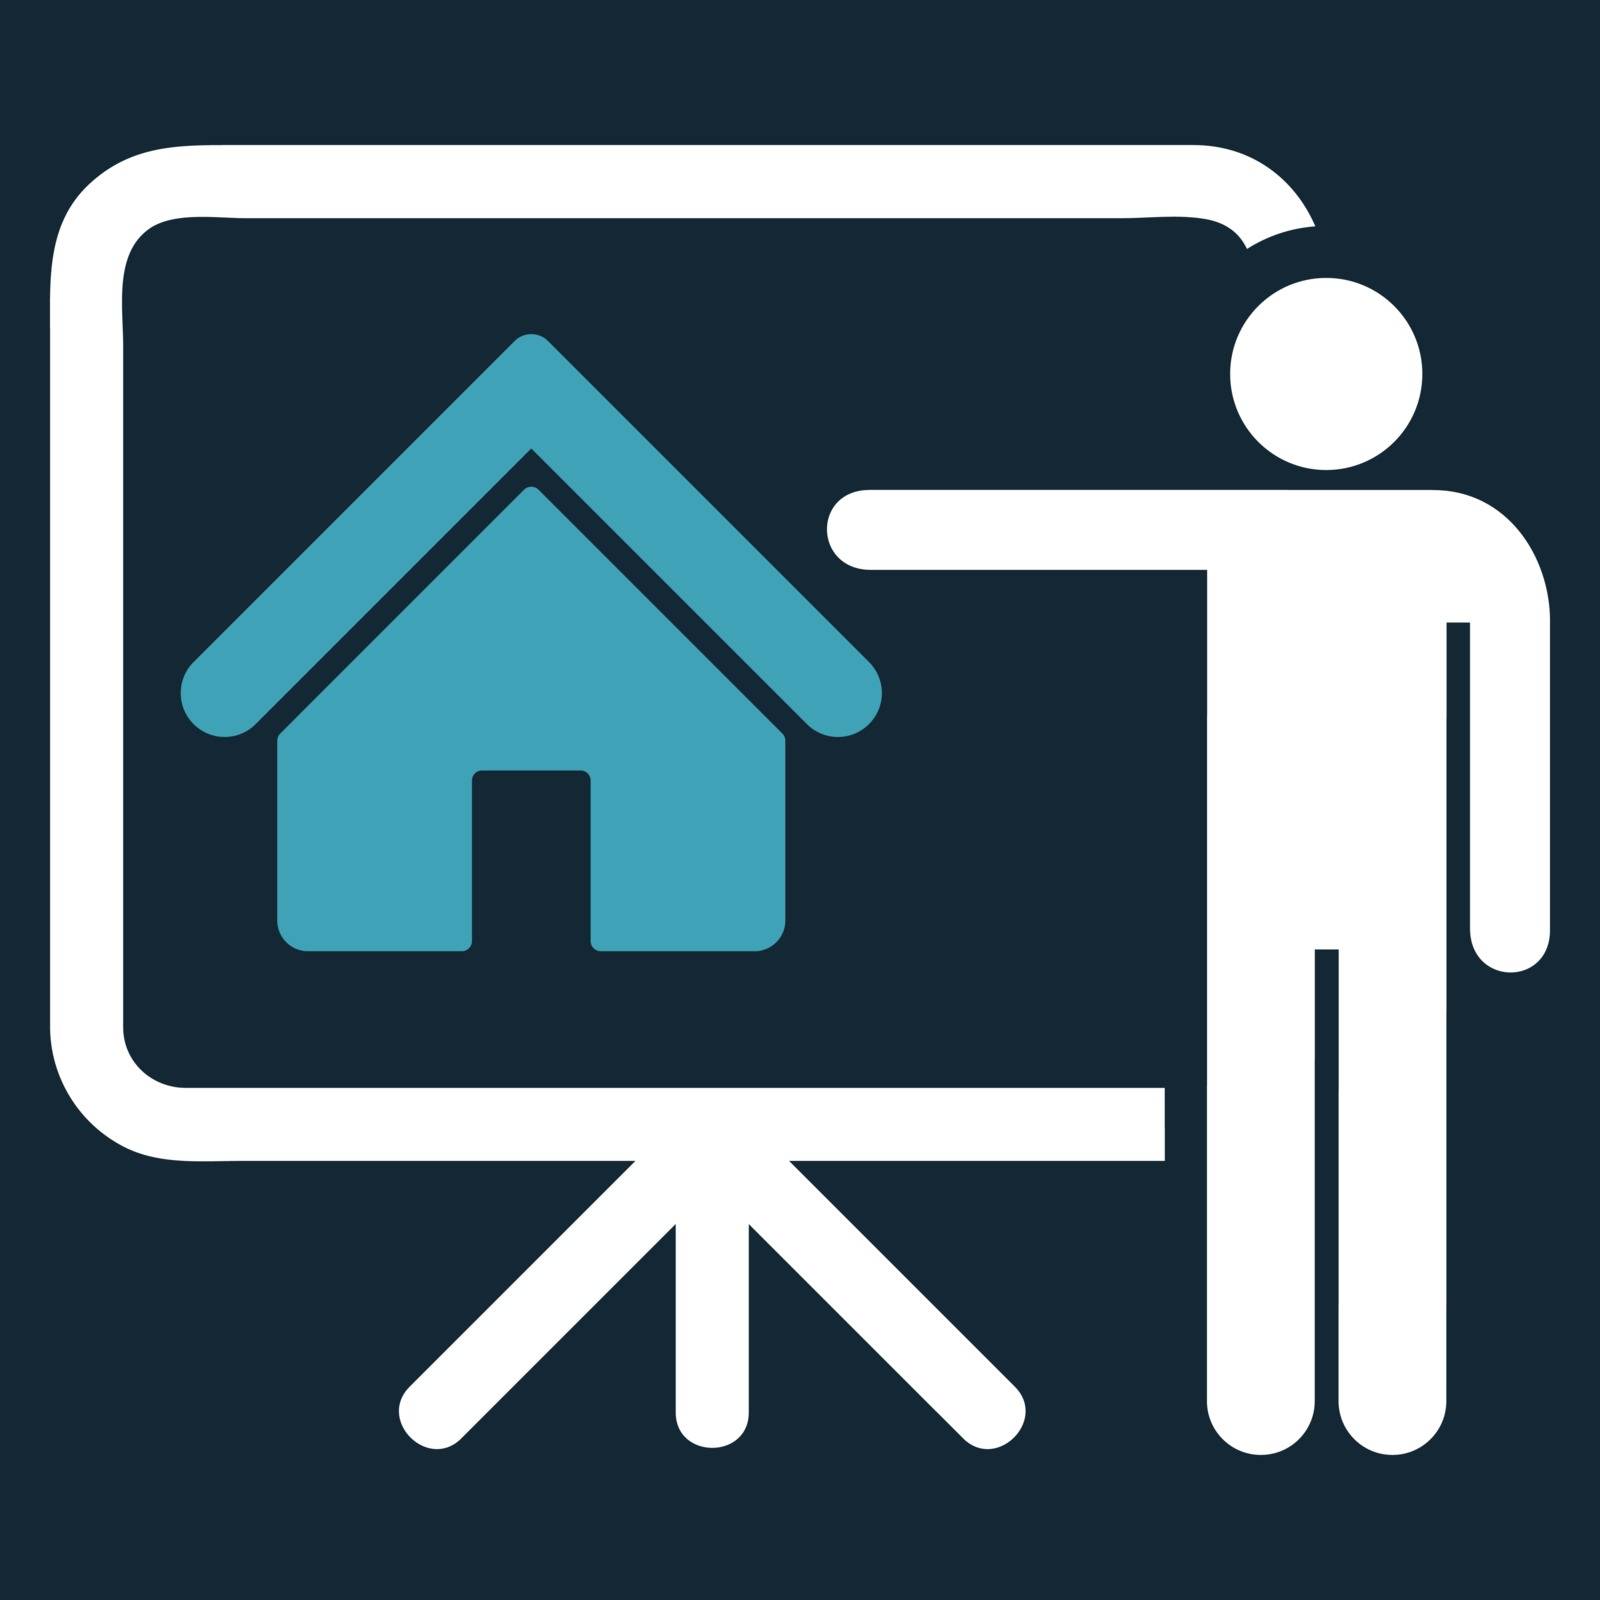 Realtor icon from Business Bicolor Set by ahasoft